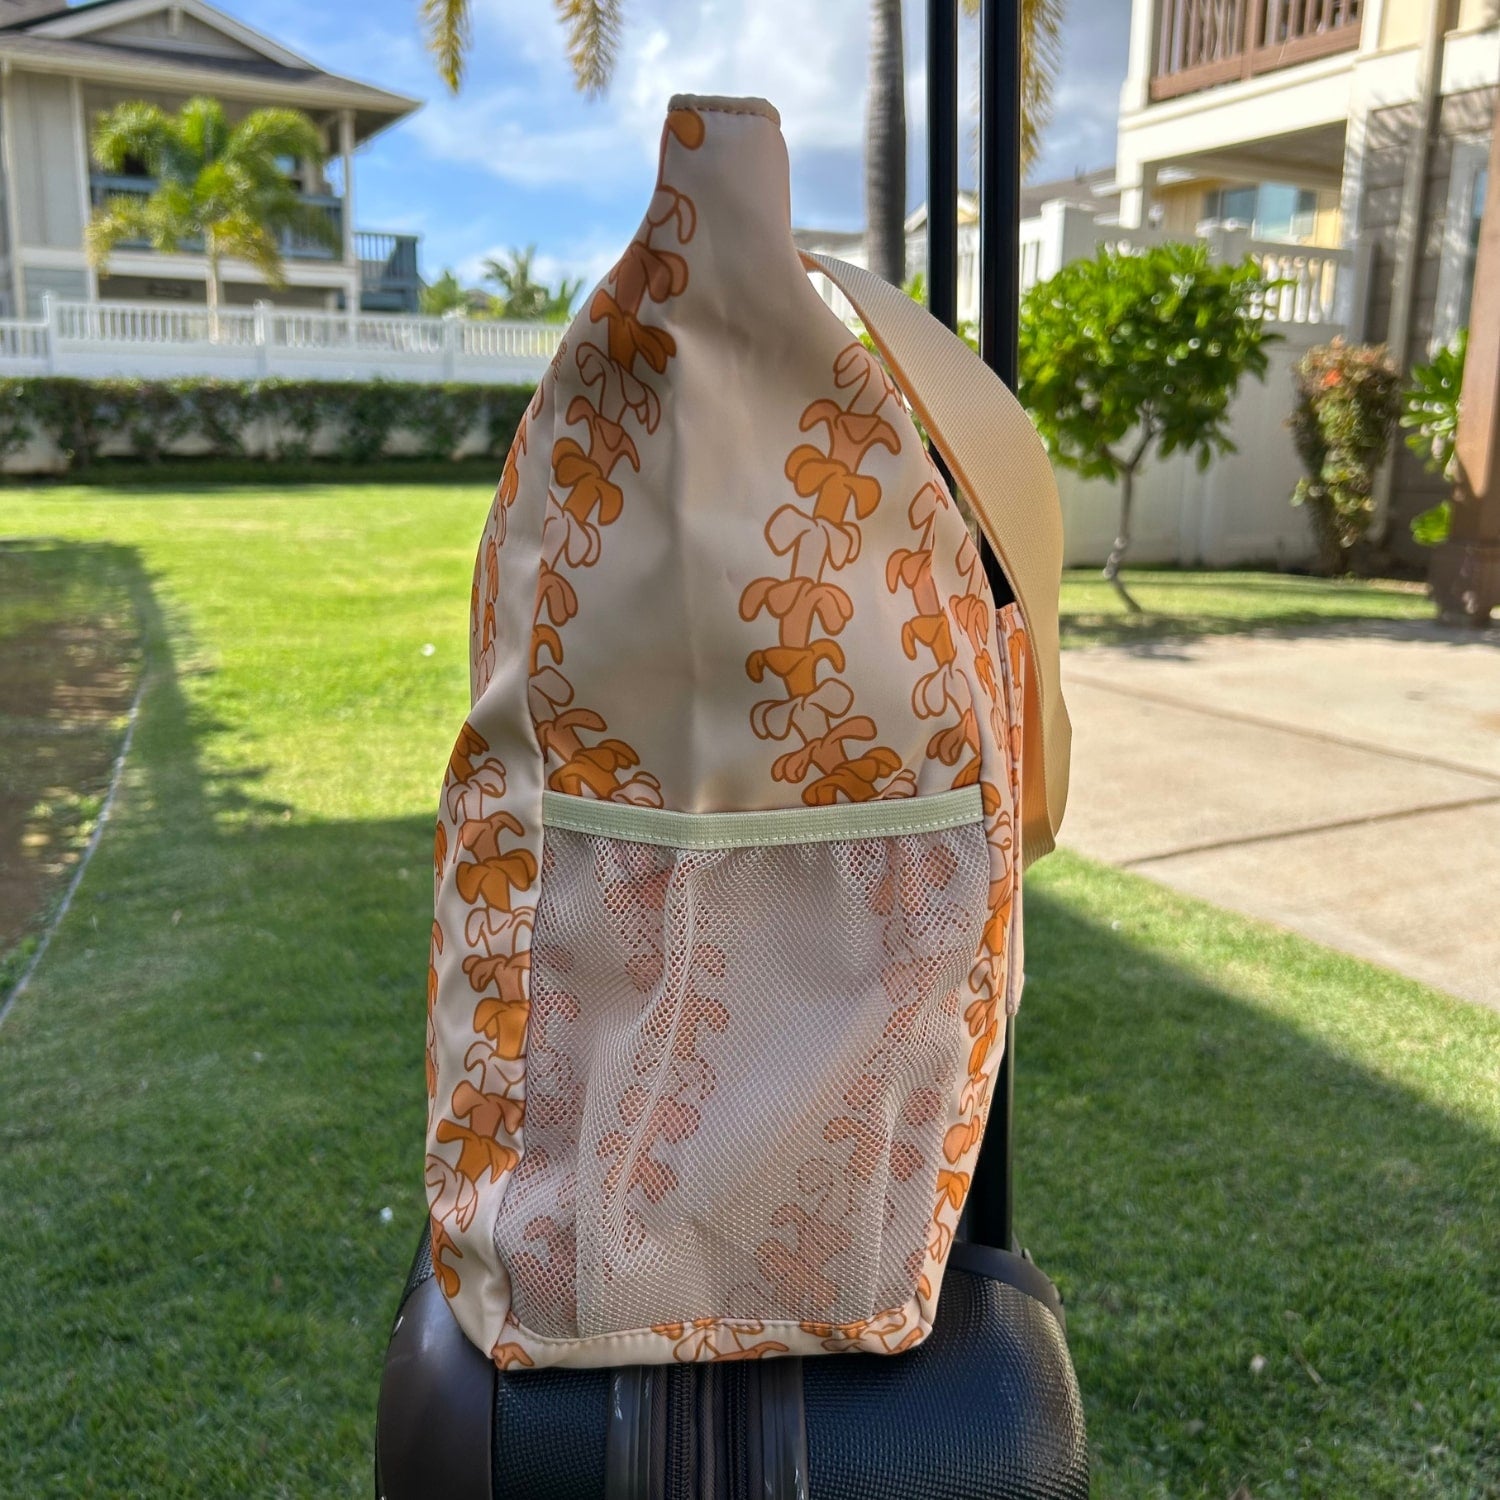 Most popular Holoholo bag in Kaulua light by Puakenikeni Designs - Made for Hawaii Puakenikeni tote bag side view slipped onto rolling luggage carry-on